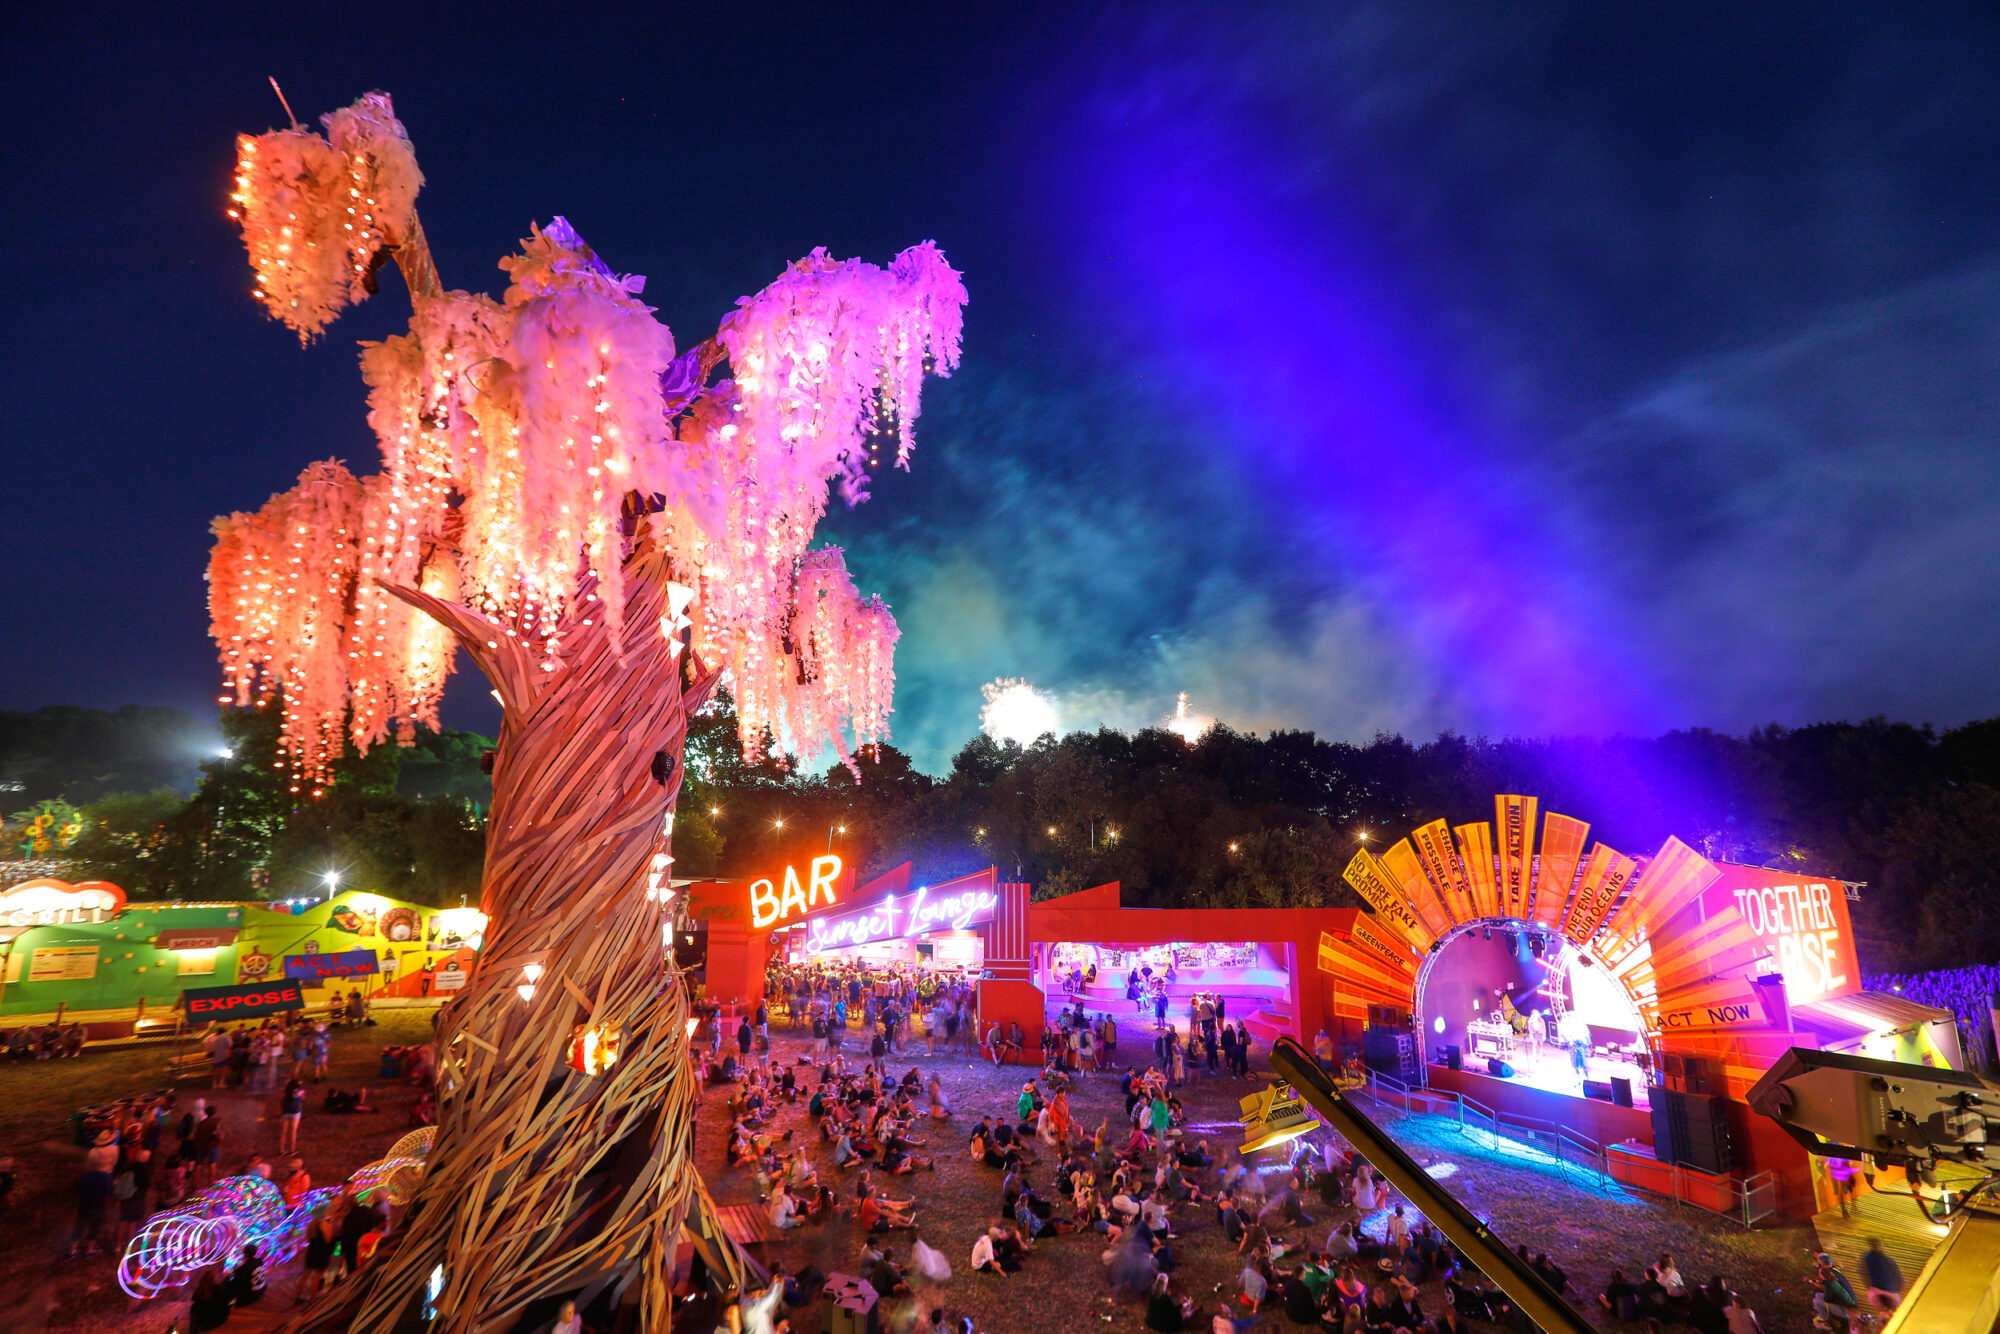 A giant artificial tree lit up with fairy lights overlooks a huge festival crowd at night.